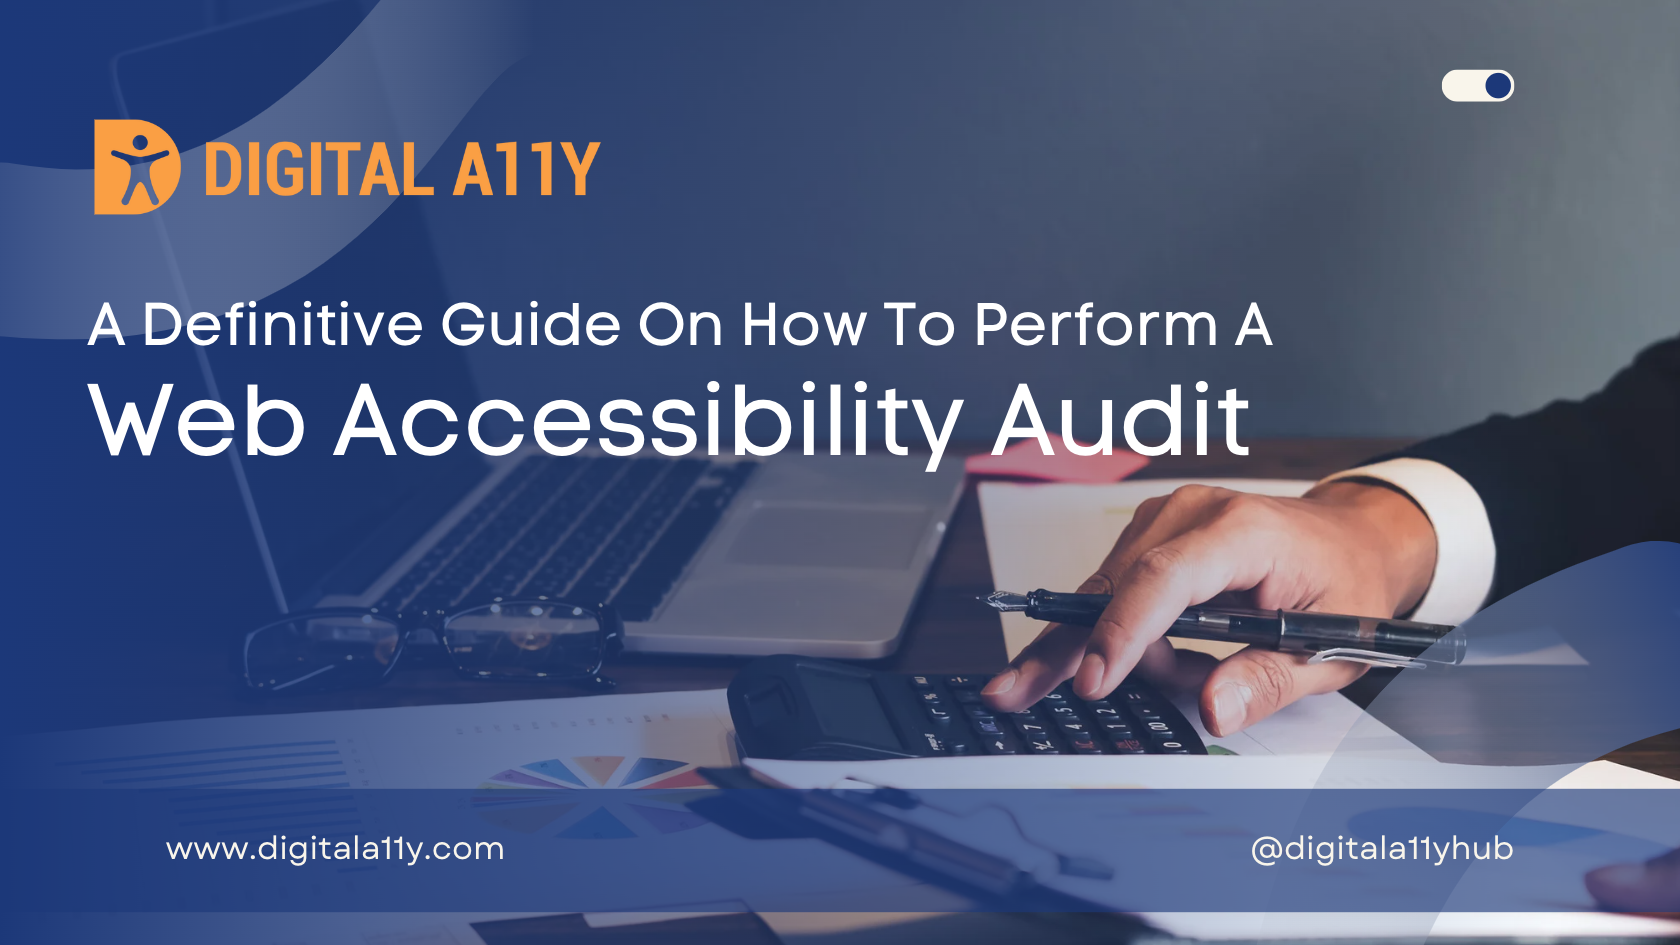 A Definitive Guide On How To Perform A Web Accessibility Audit